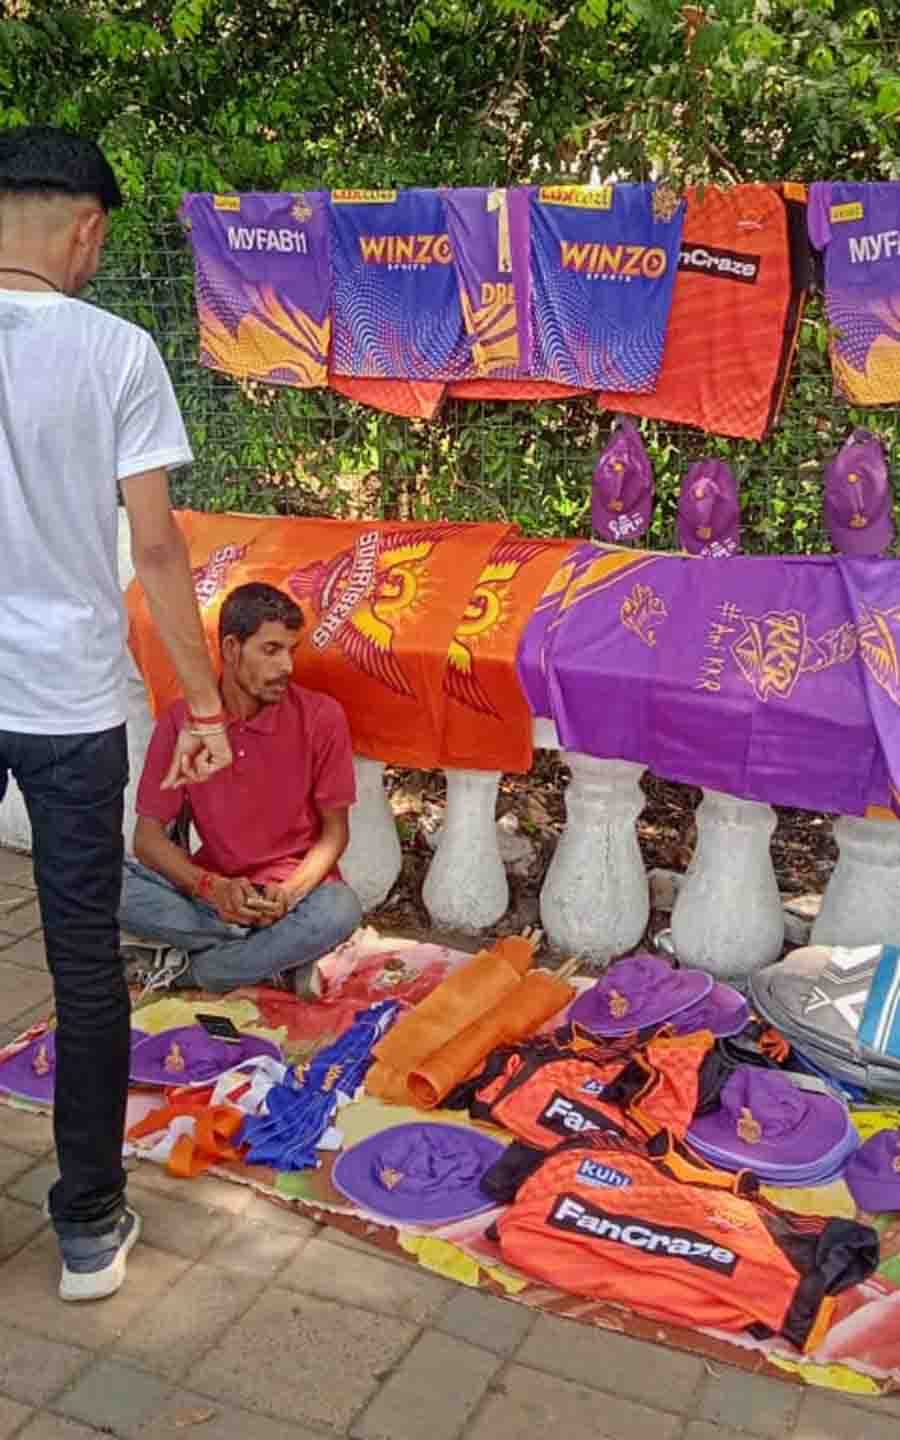 IPL merchandise up for grabs in the Maidan area before the start of the match